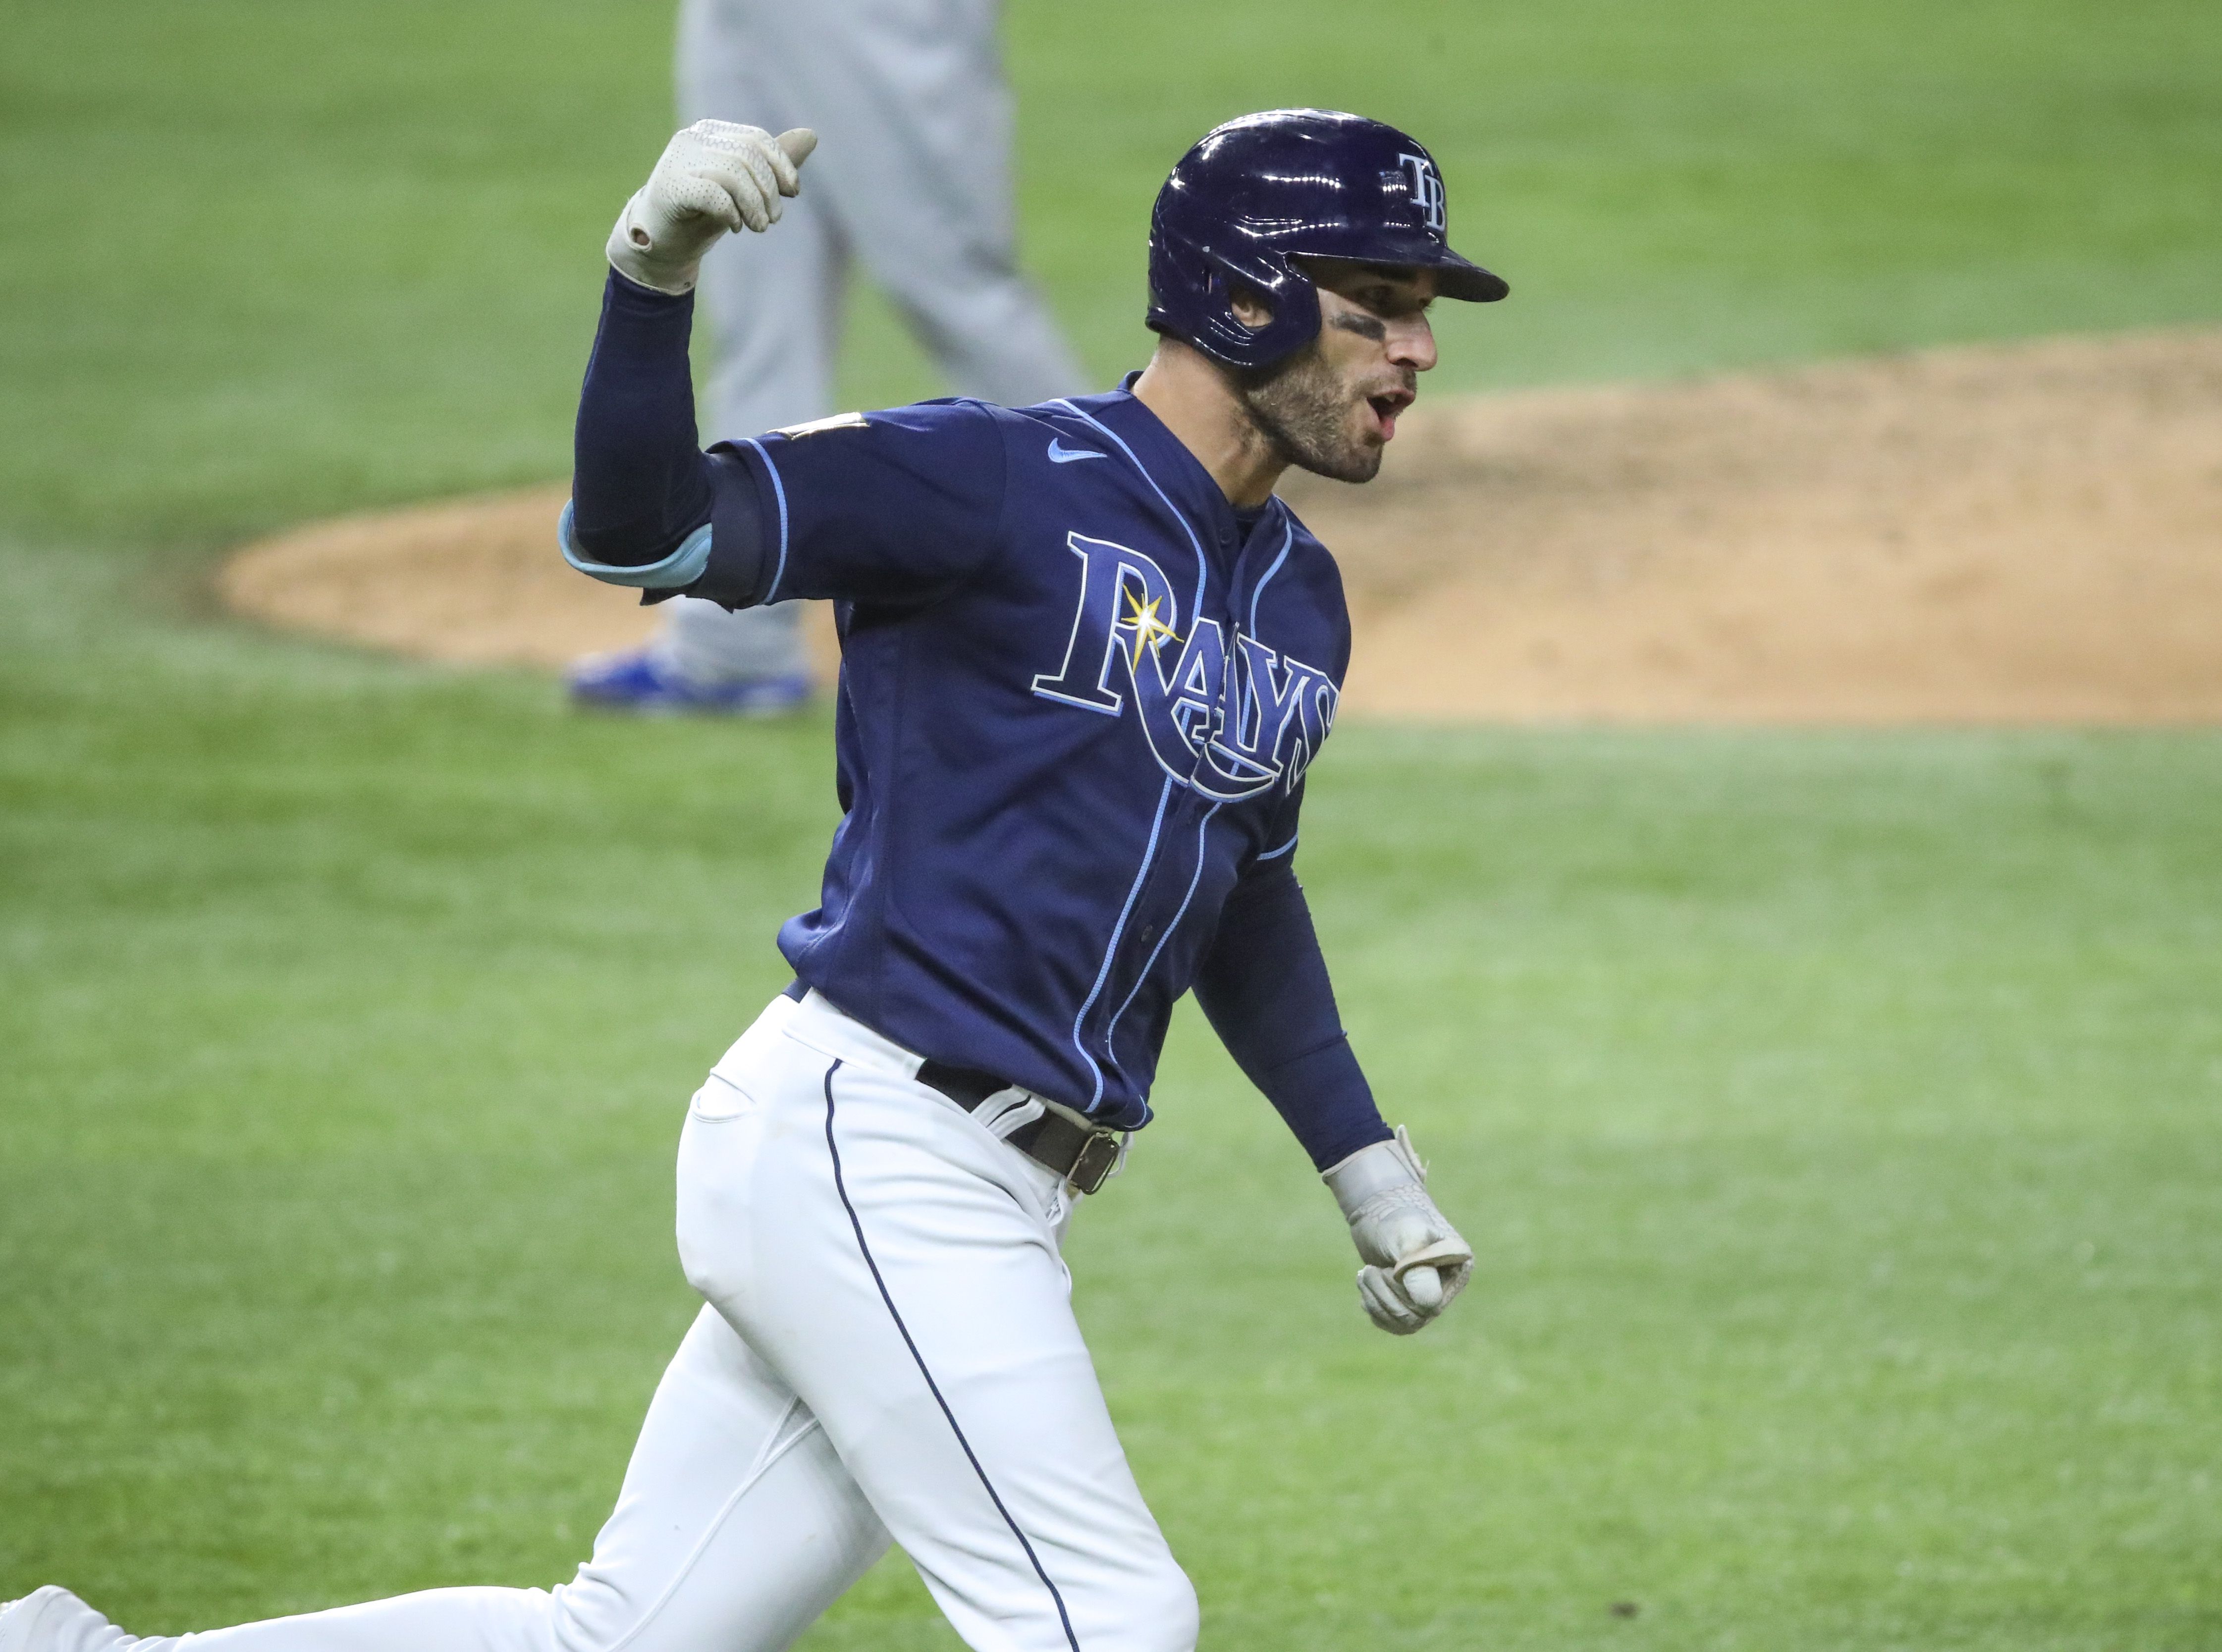 Meadows, Margot lead Rays over Astros 5-4 to avoid sweep